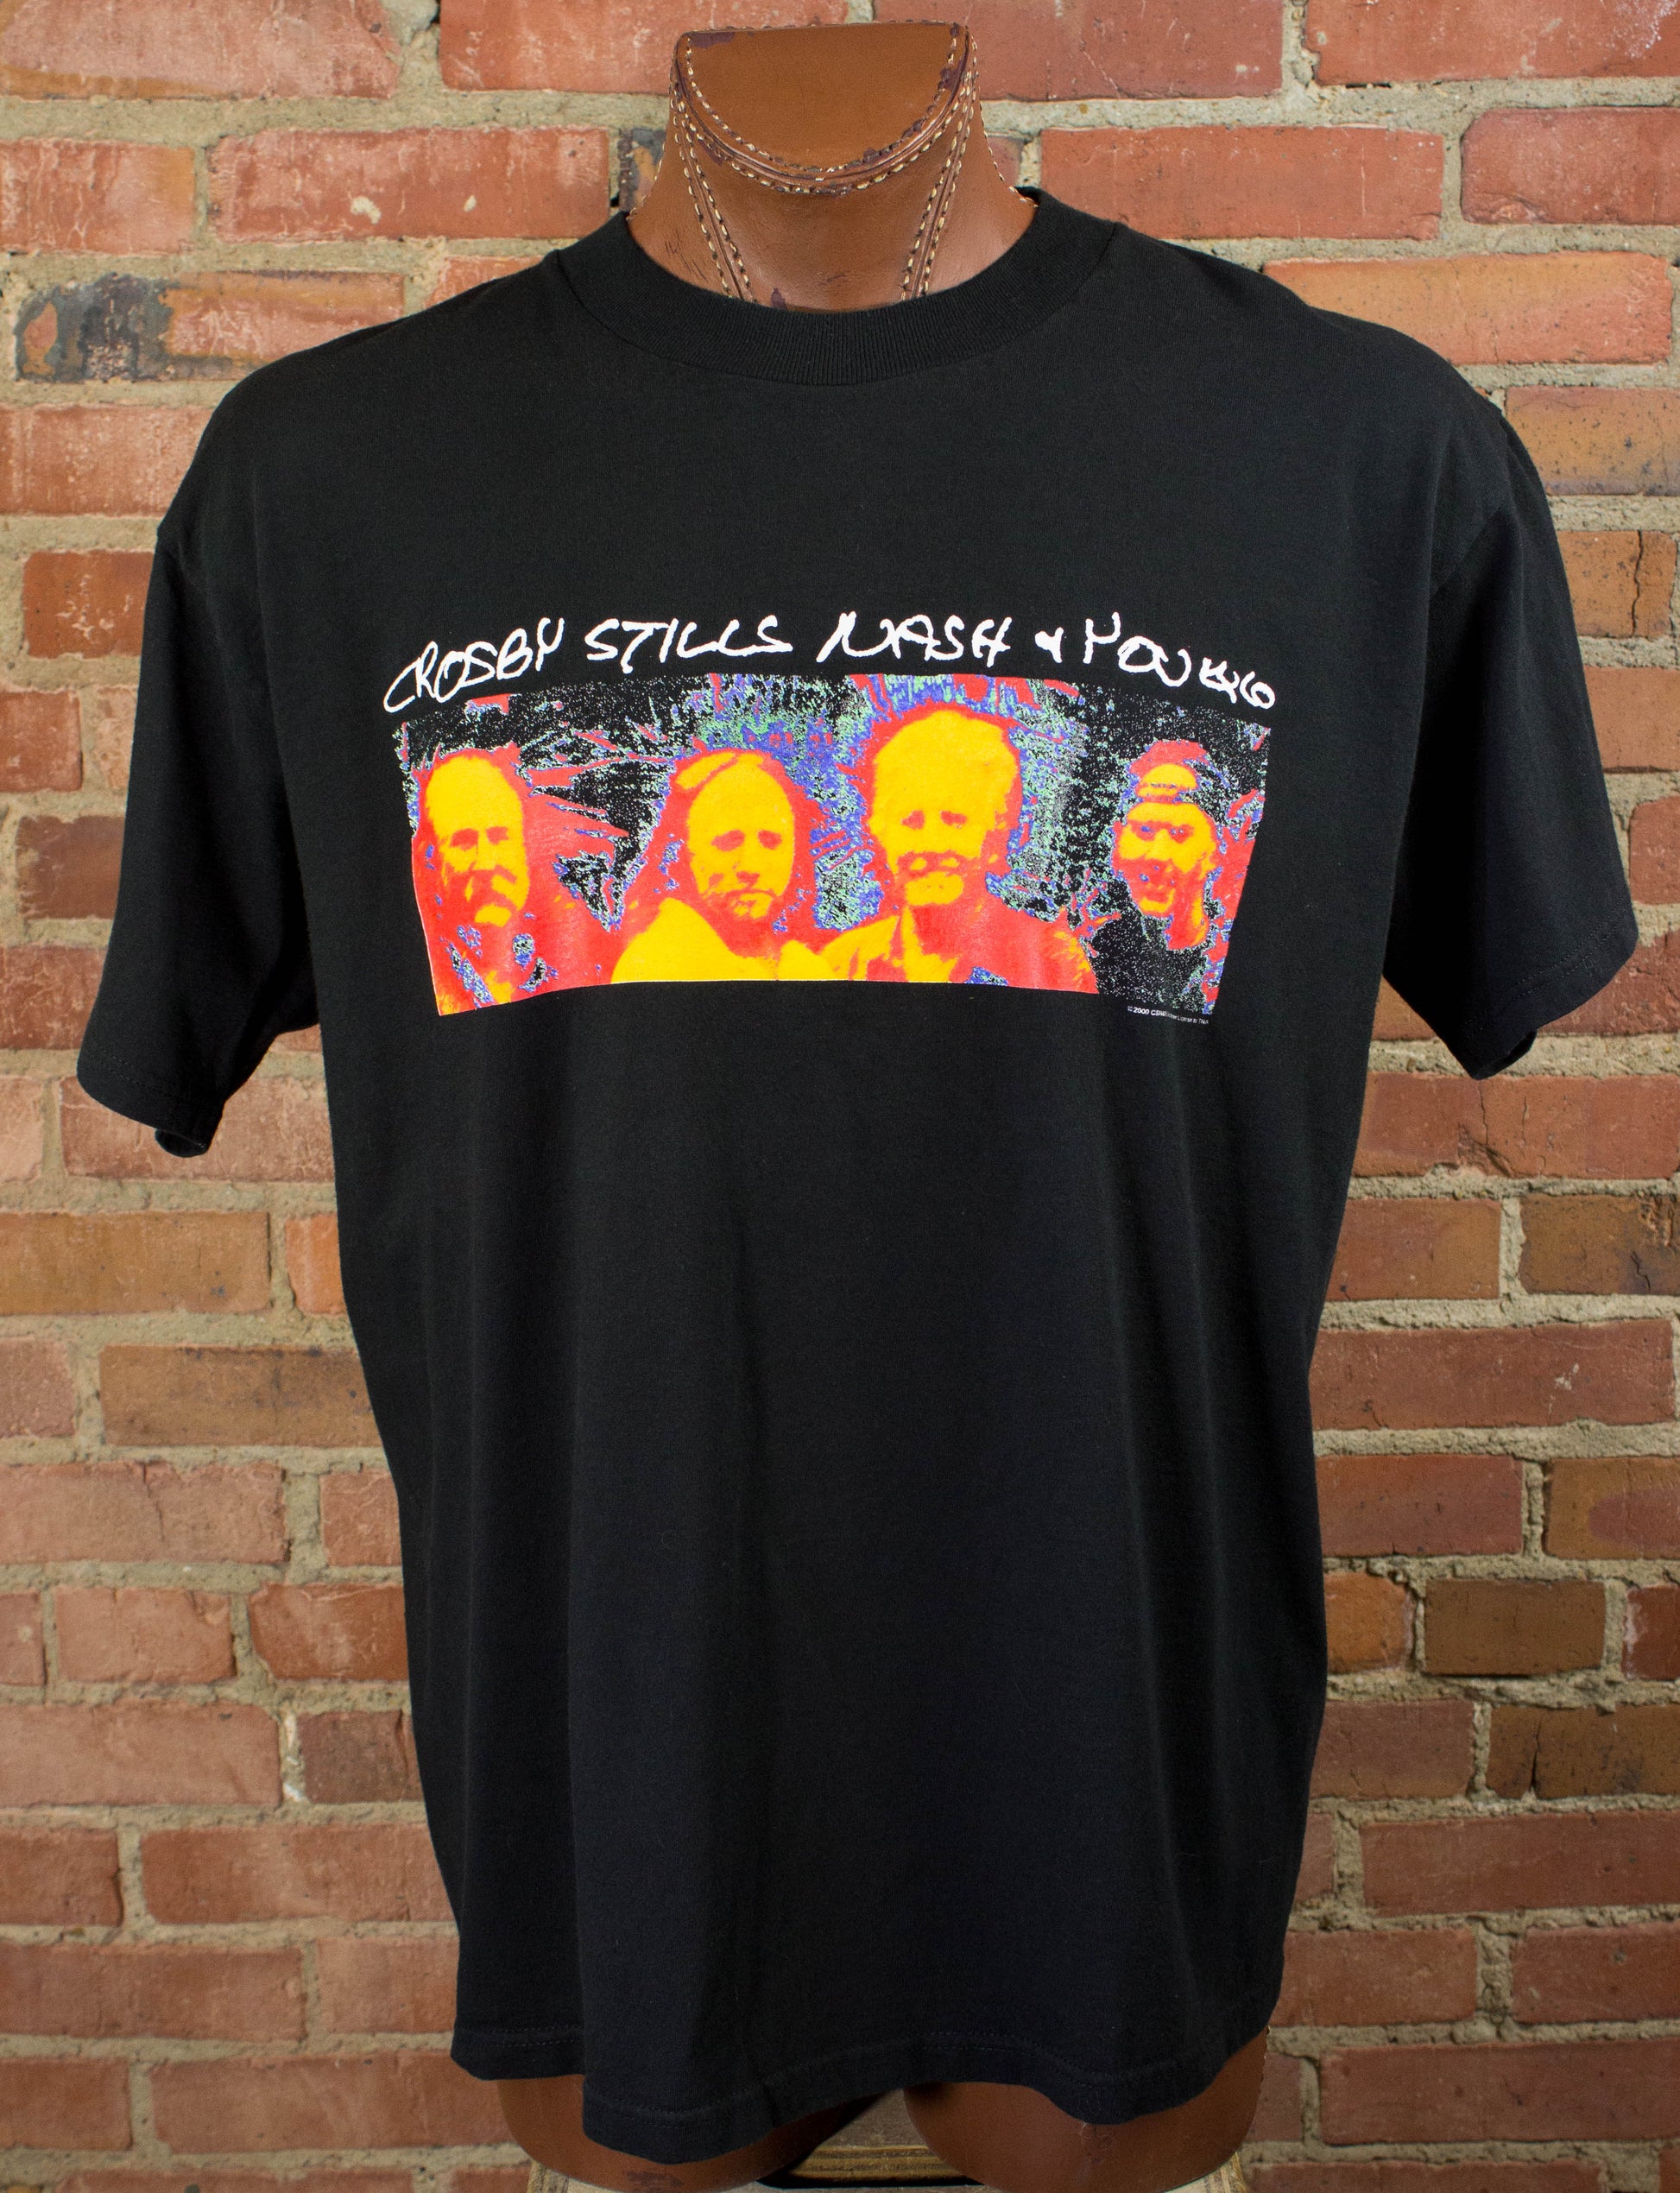 Crosby Stills Nash and Young 2000 Looking Forward To... Black Concert T Shirt Unisex XXL